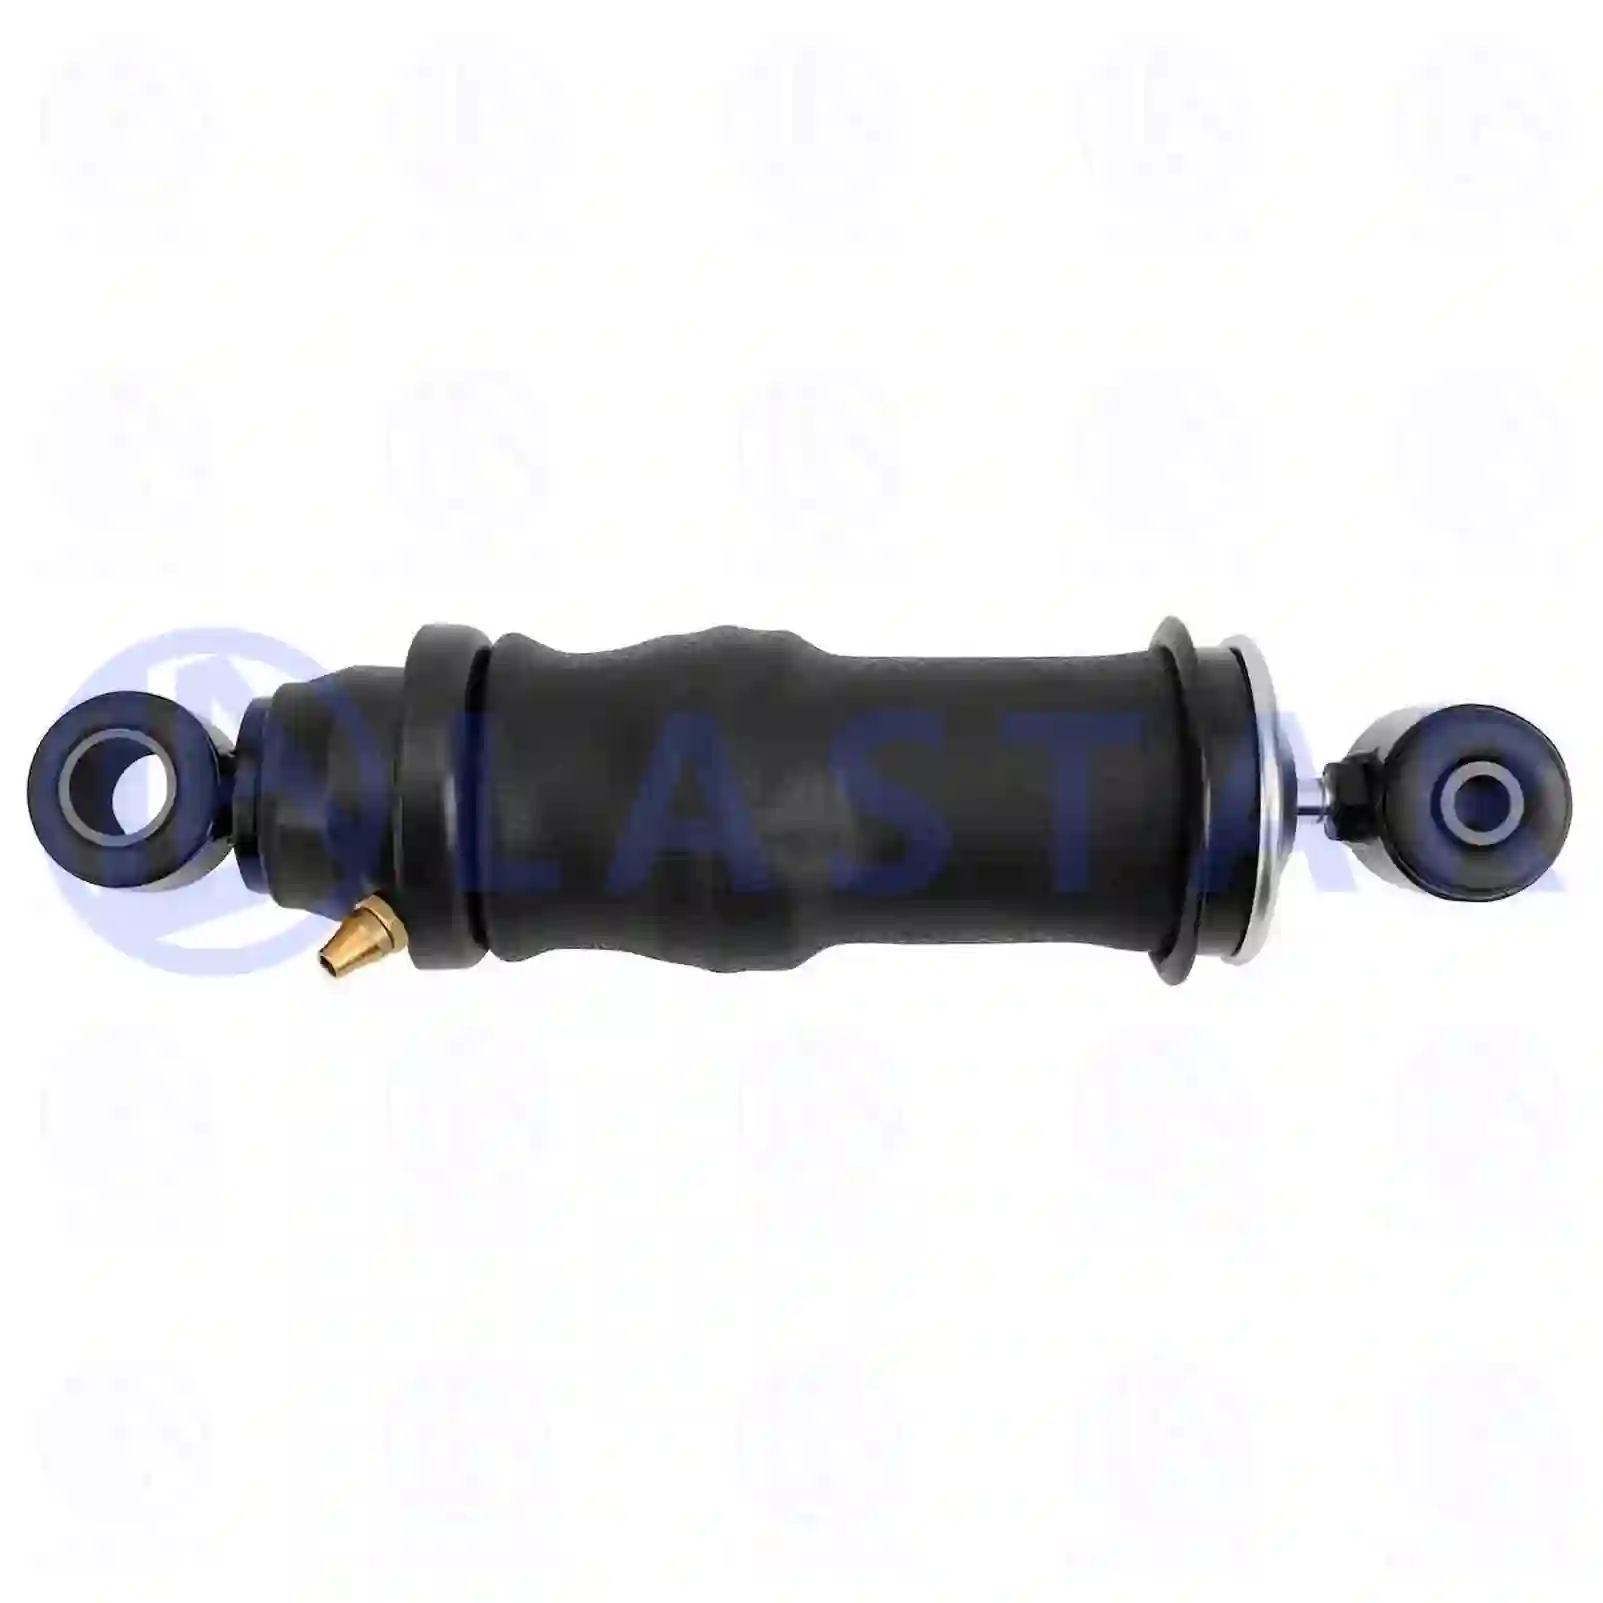 Cabin shock absorber, with air bellow, 77734862, 9428905319, 9428905919, , , ||  77734862 Lastar Spare Part | Truck Spare Parts, Auotomotive Spare Parts Cabin shock absorber, with air bellow, 77734862, 9428905319, 9428905919, , , ||  77734862 Lastar Spare Part | Truck Spare Parts, Auotomotive Spare Parts